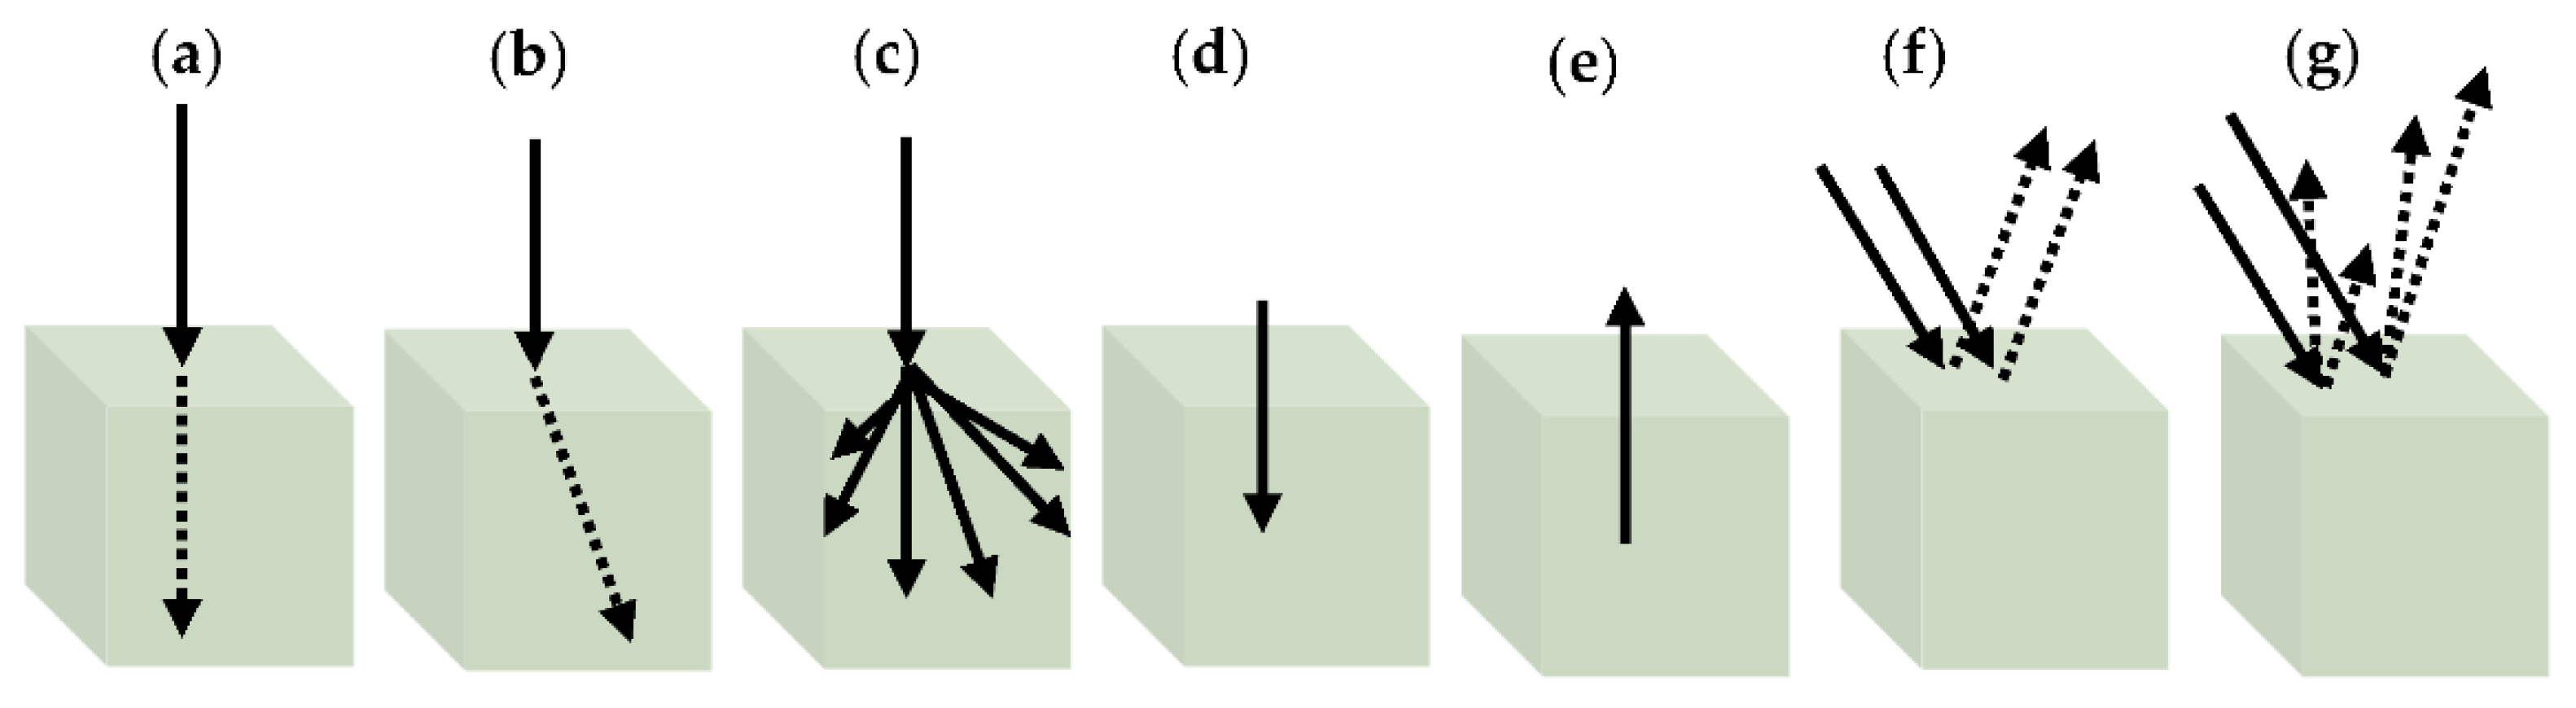 Segmented images of wheat refractions (a) sound grains, (b) damaged